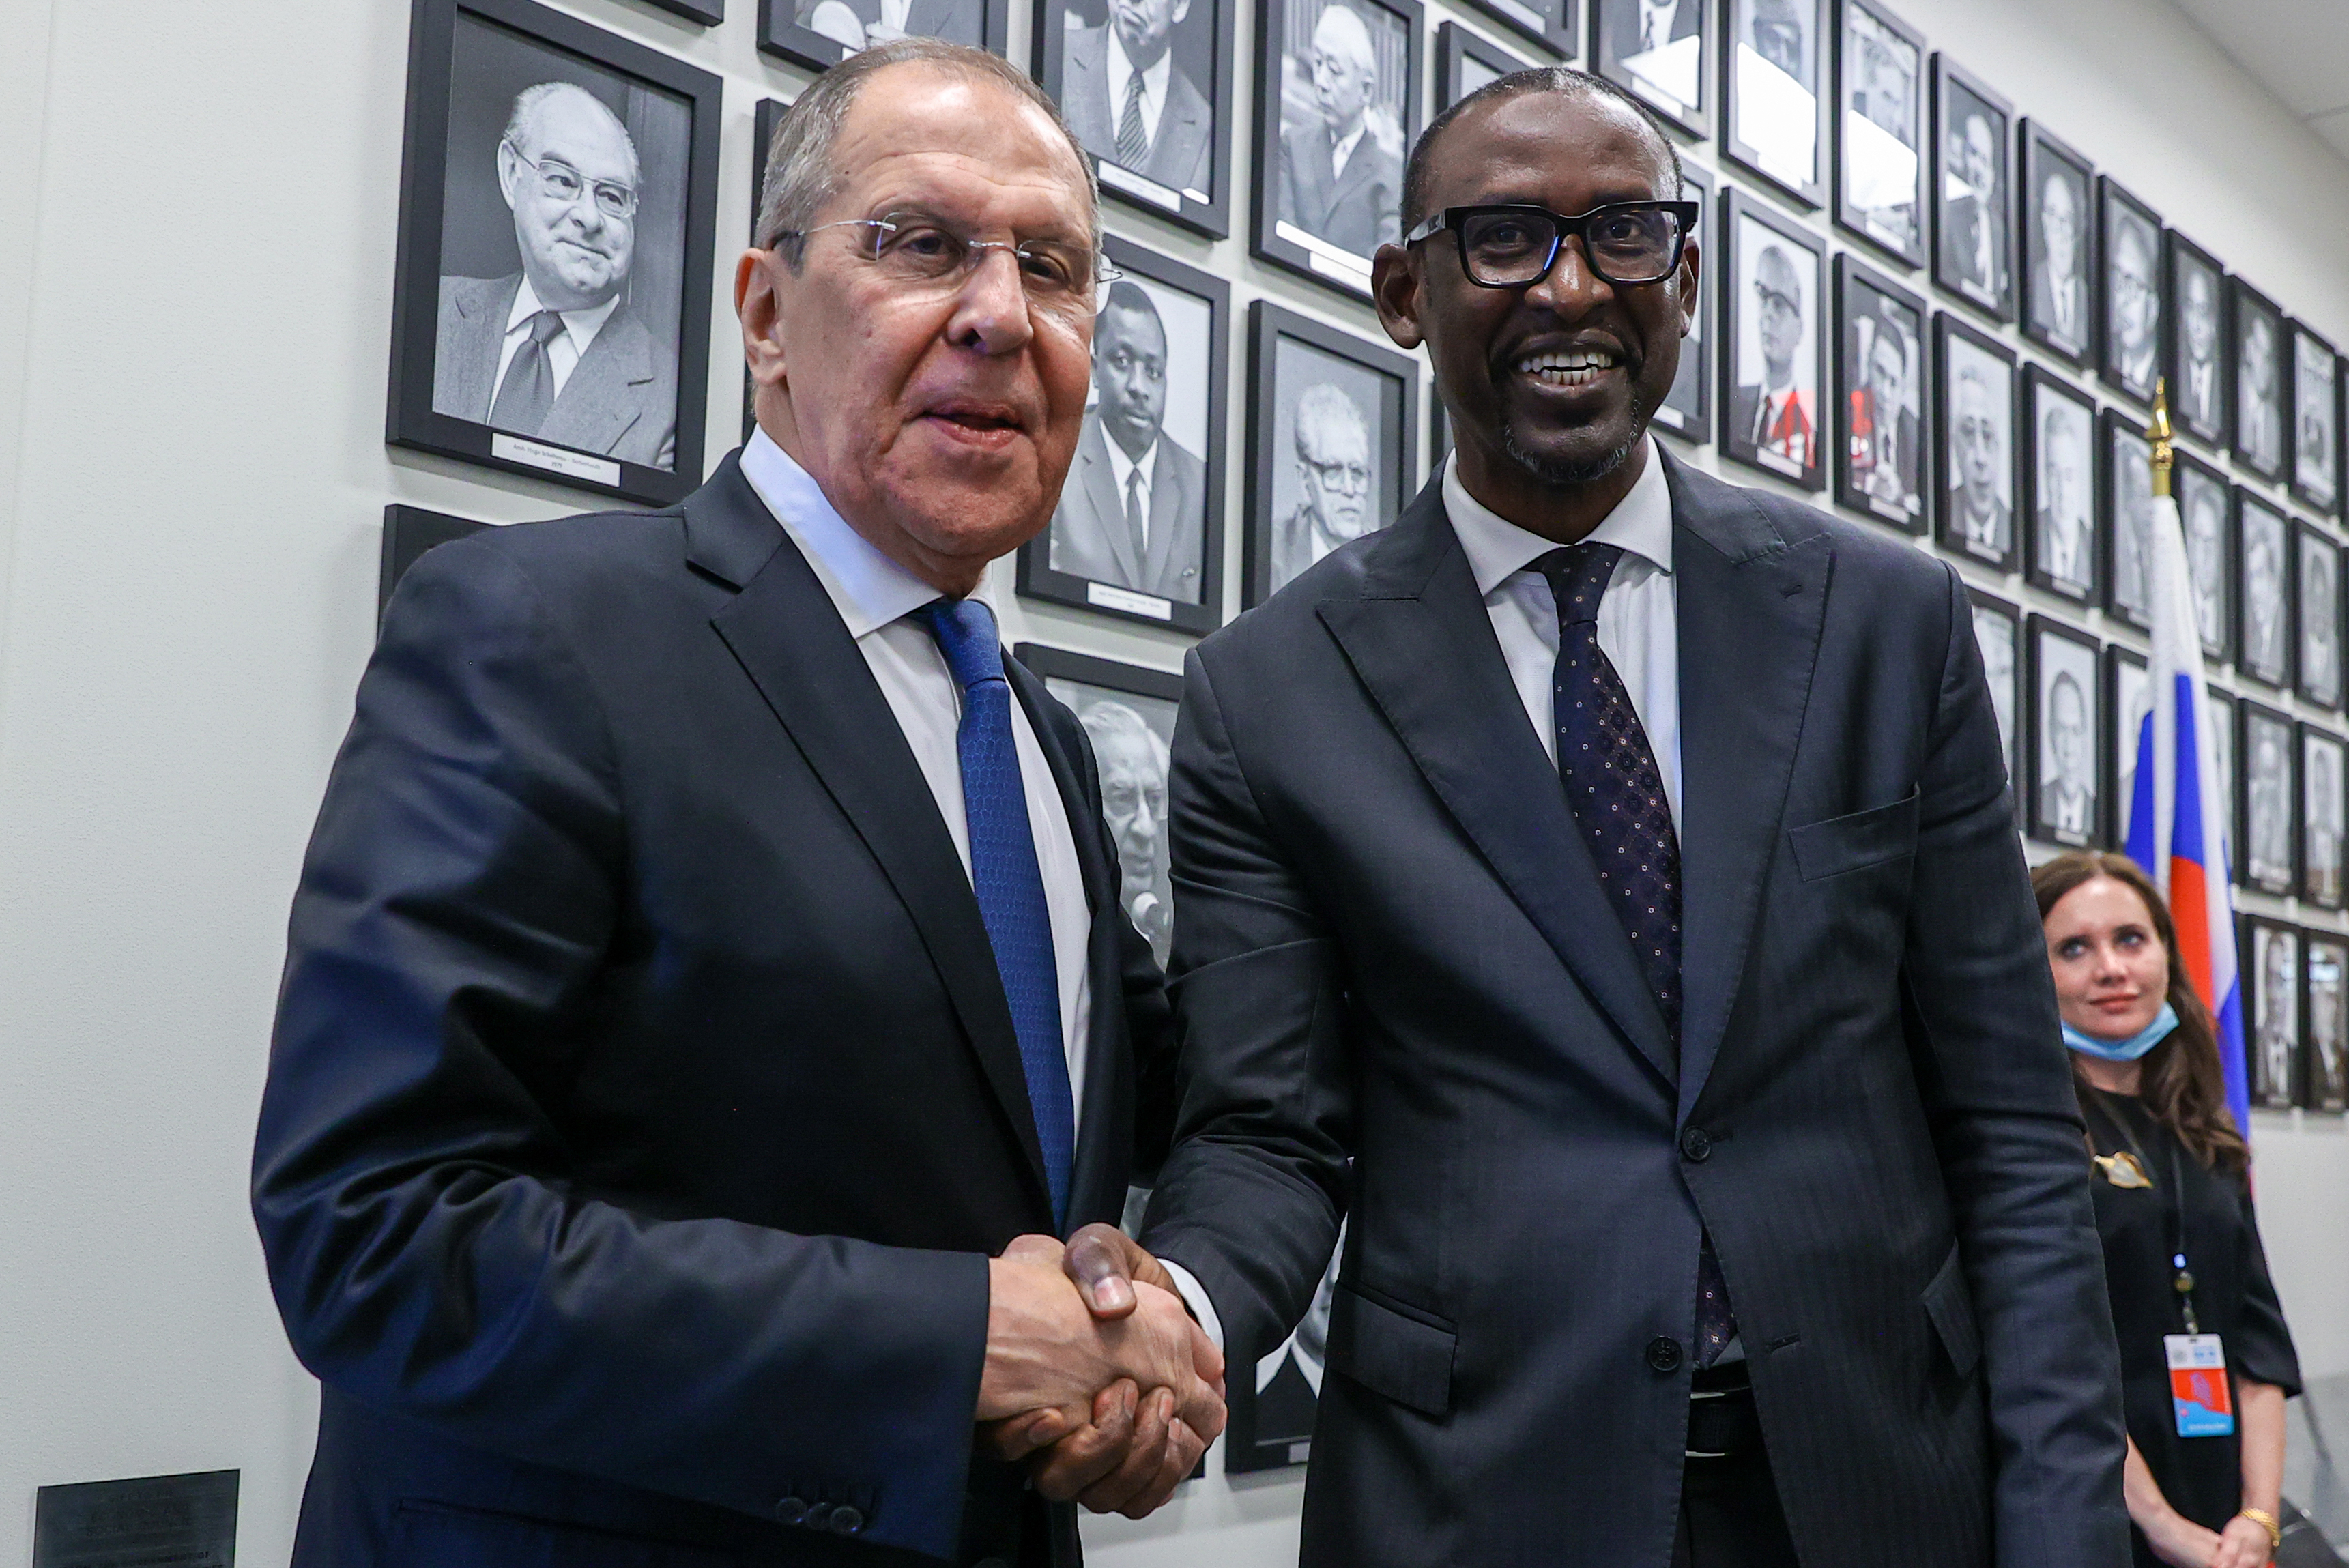 Photo above: Russian Foreign Minister Sergei Lavrov (L) and Malian Minister of Foreign Affairs Abdoulaye Diop shake hands during a meeting on the sidelines of the United Nations General Assembly on Sept, 25, 2021. Photo by Russian Foreign Ministry\TASS via Getty Images.